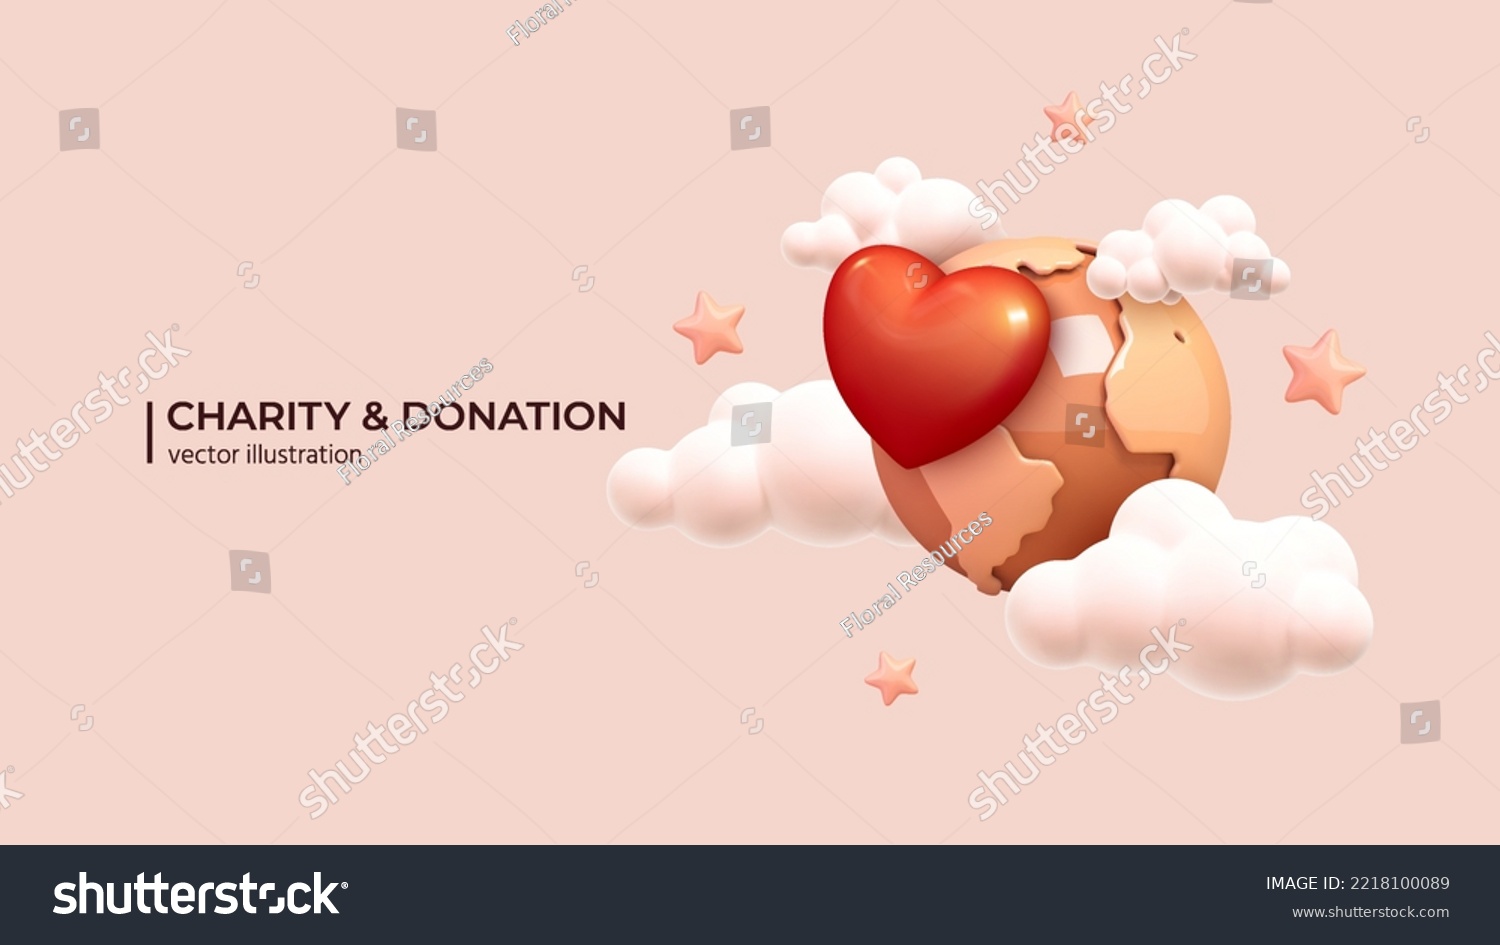 SVG of Carity - 3D Concept of support and kindness in community. Share empathy and hope with needy. Help and compassion in life. Realistic 3d cartoon minimal style. Vector illustration svg